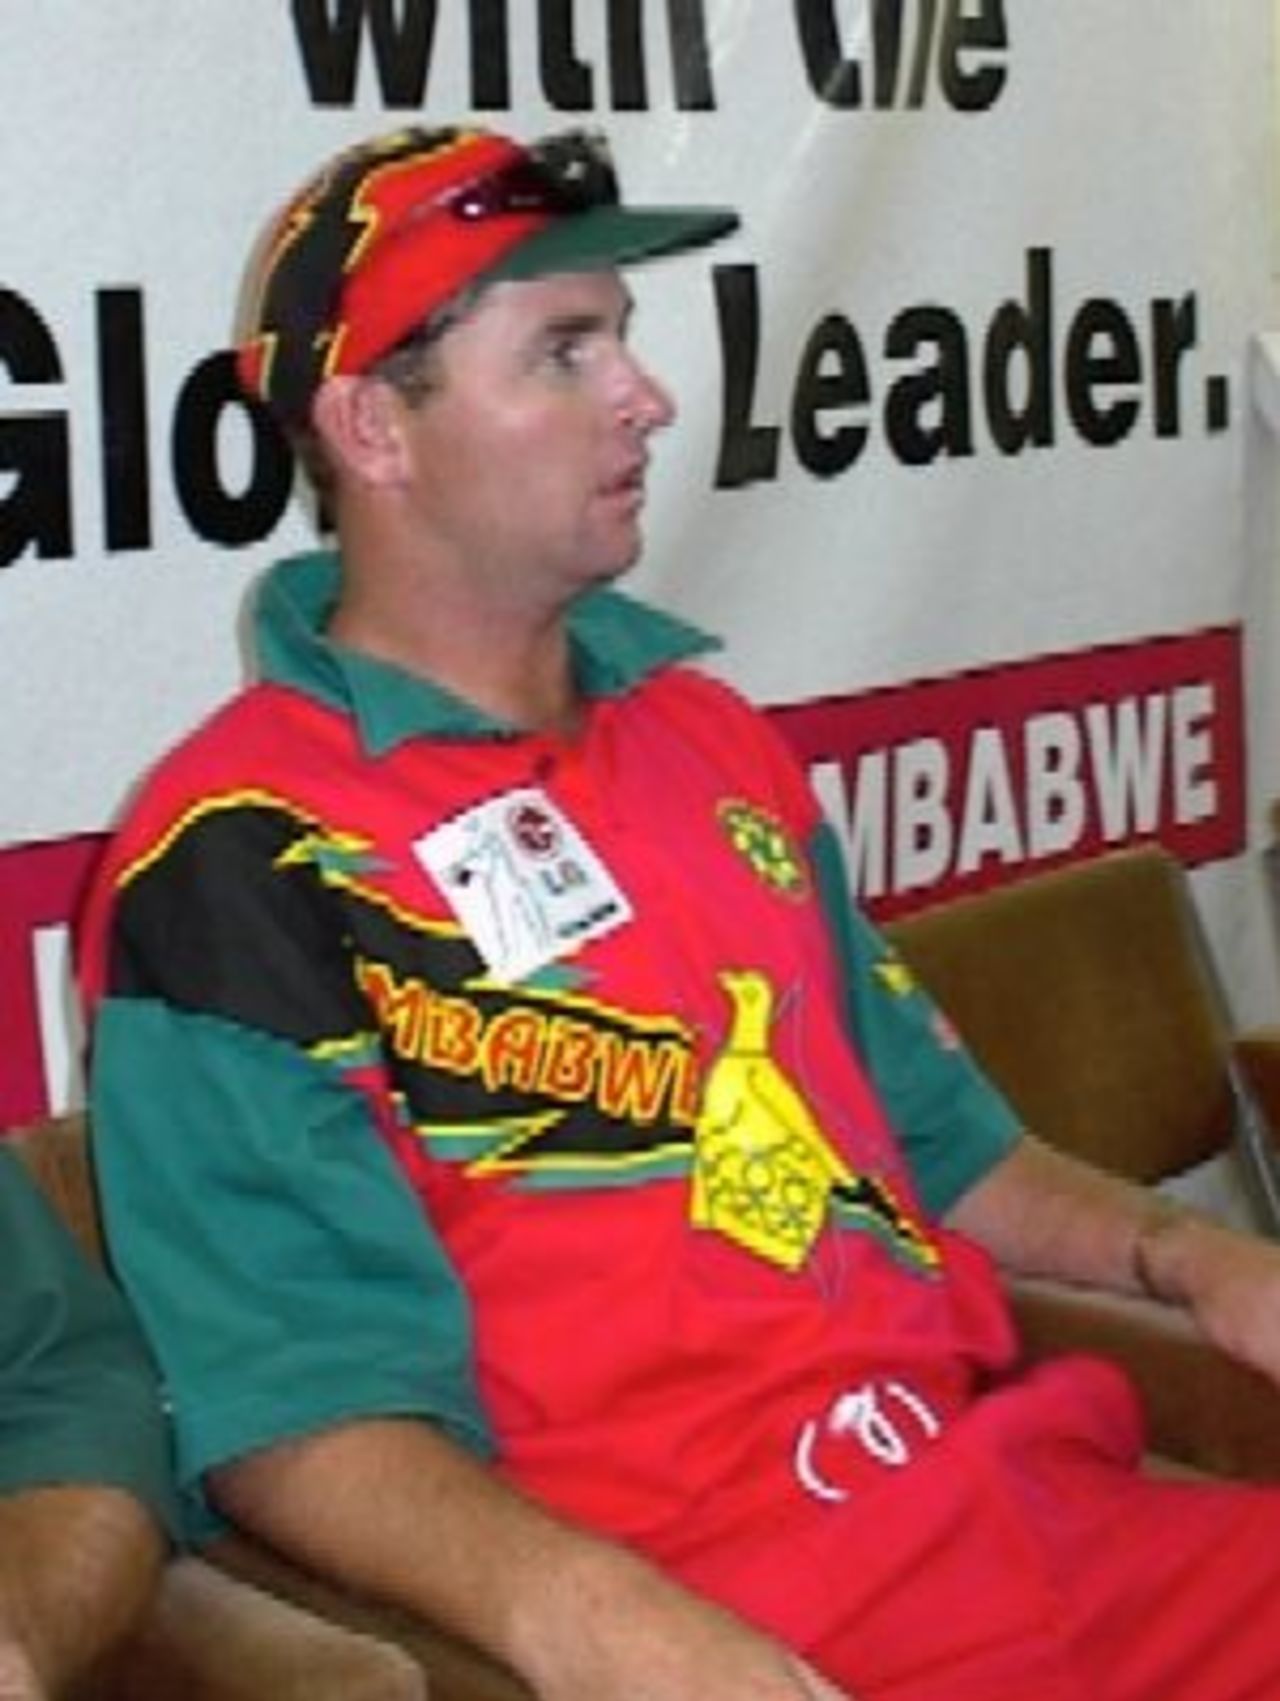 Zimbabwe Captain Alistair Campbell talks to the press after losing to South Africa in the 1999 LG Cup in Nairobi, Kenya